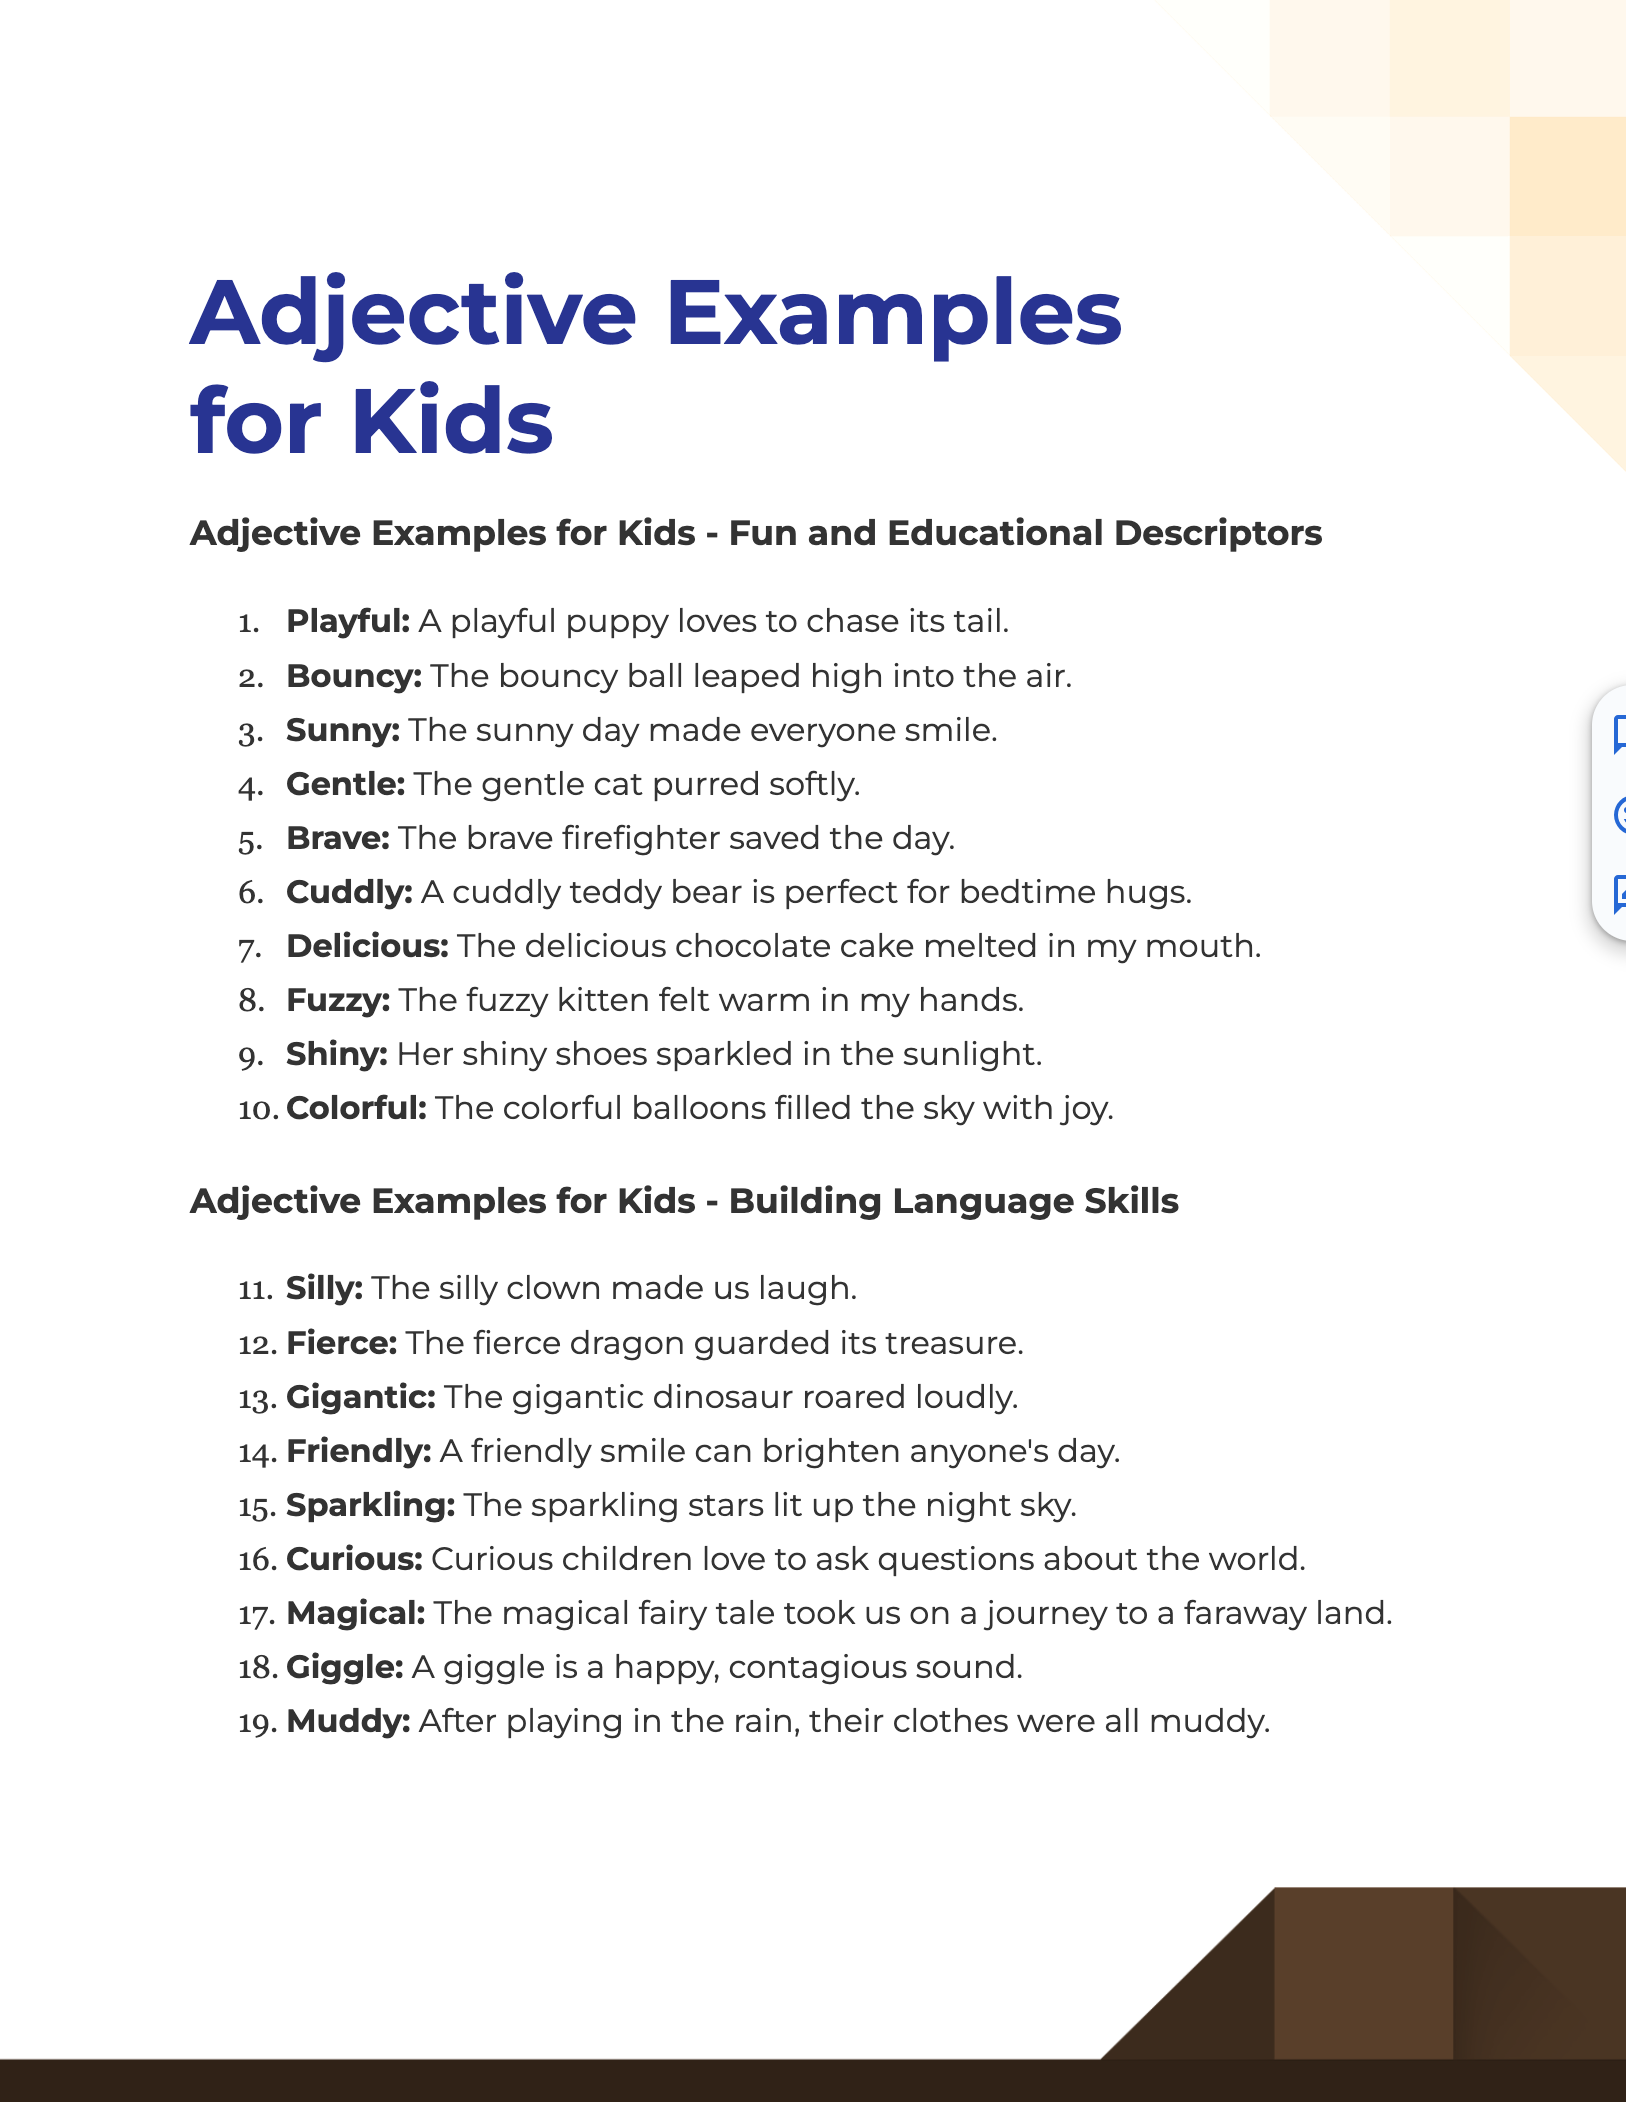 adjective examples for kids1